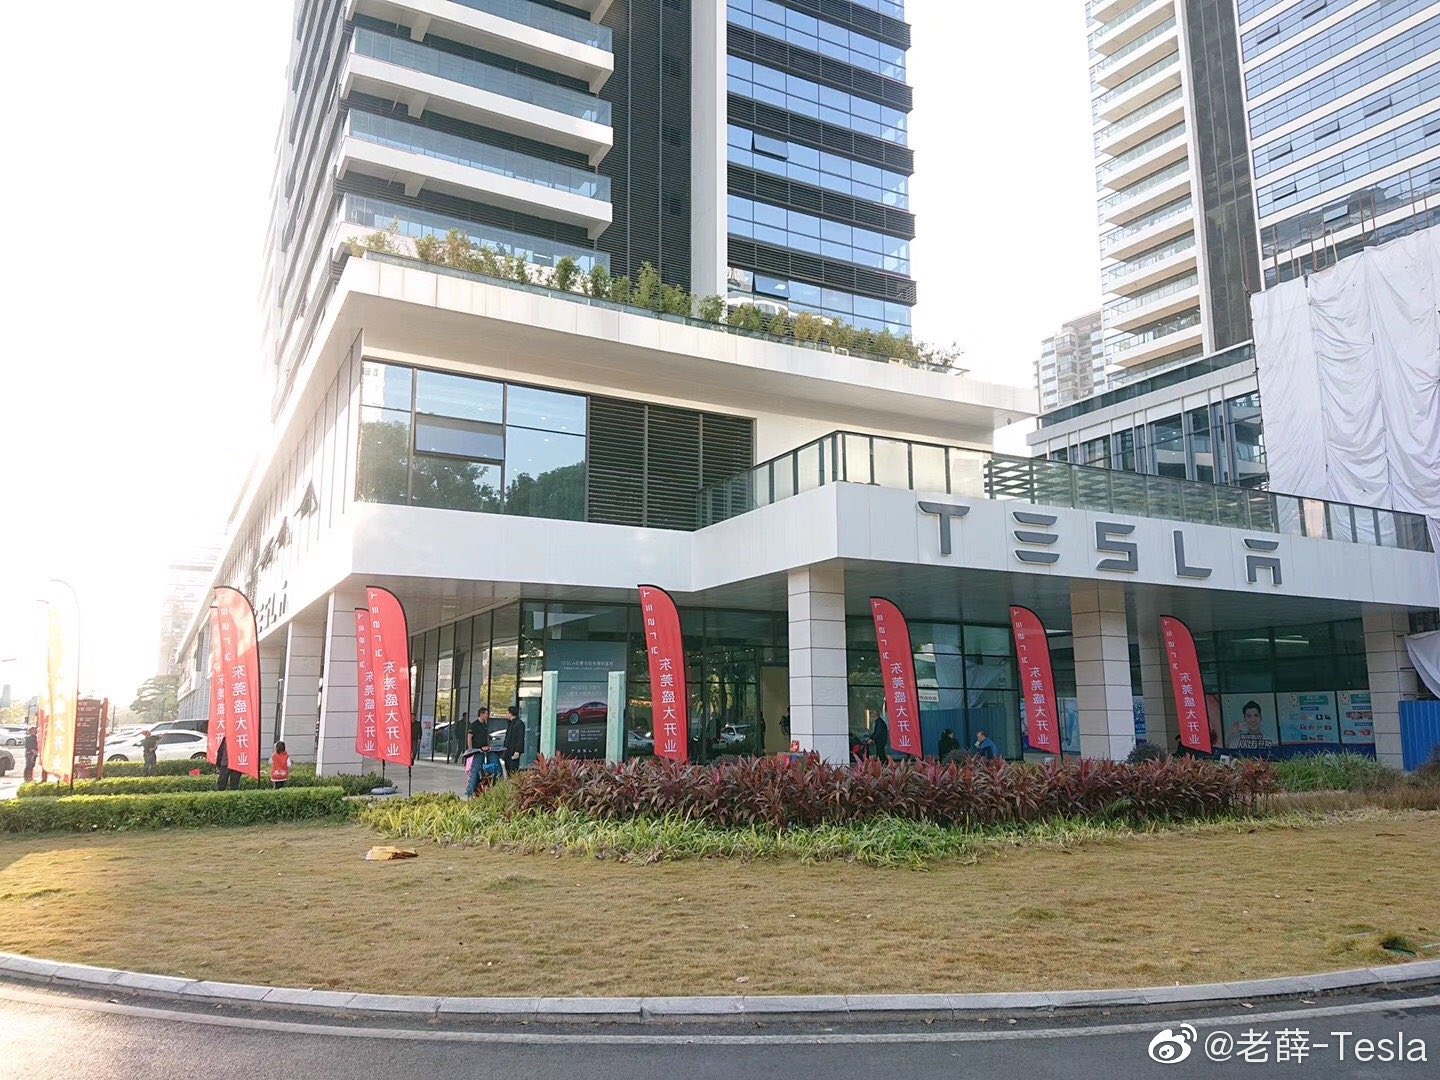 Tesla reopens Wuhan store as China regains footing after COVID-19 outbreak